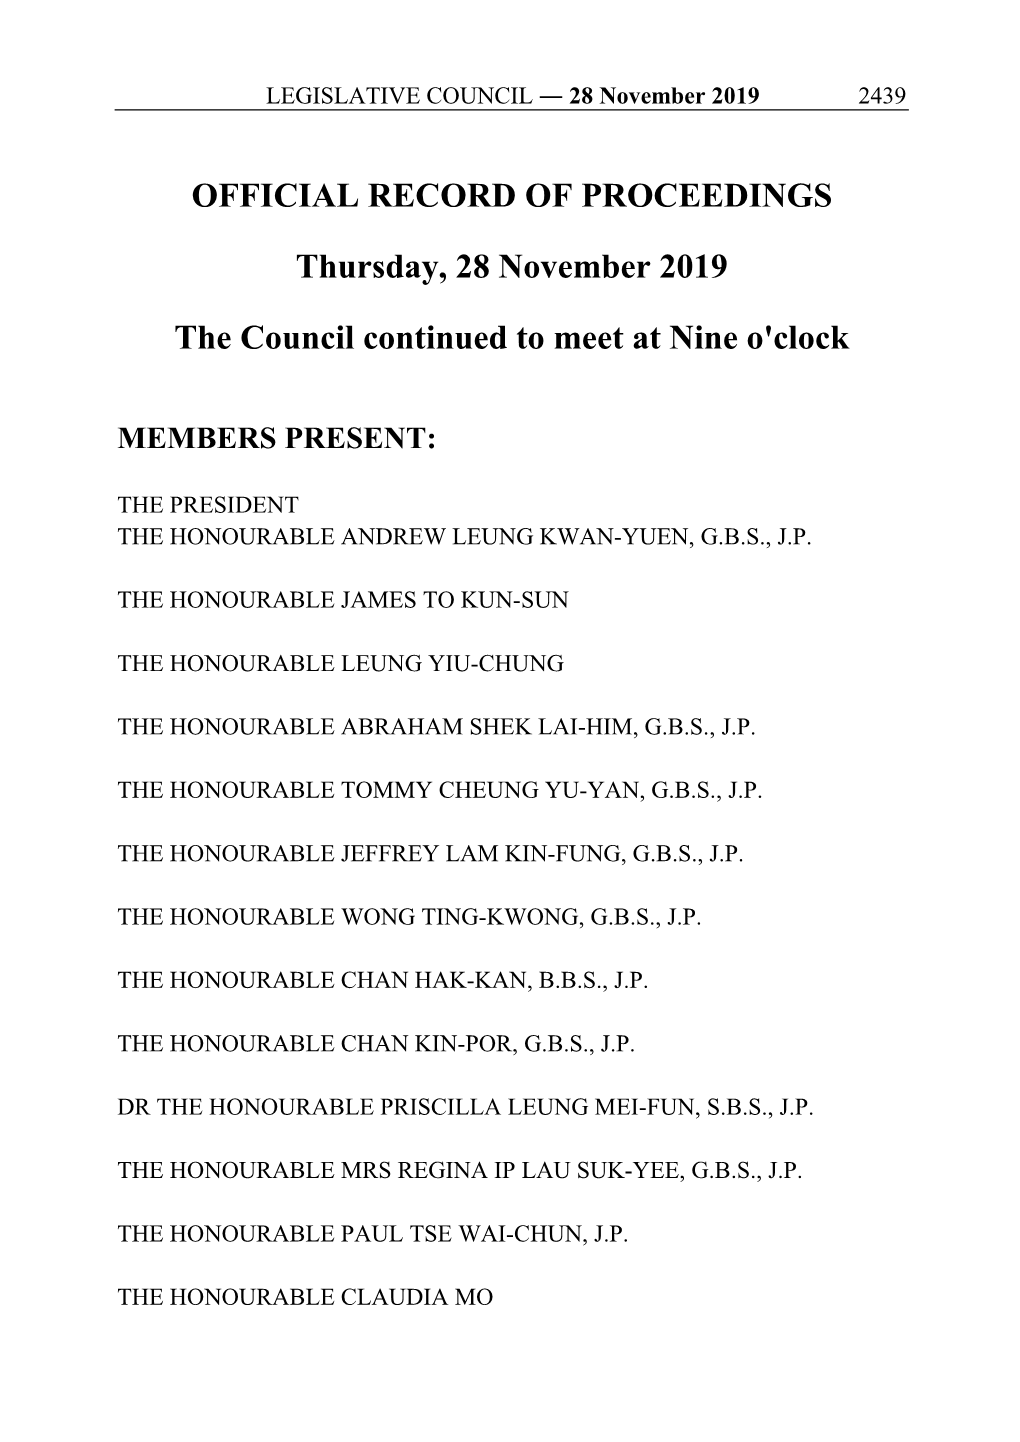 OFFICIAL RECORD of PROCEEDINGS Thursday, 28 November 2019 the Council Continued to Meet at Nine O'clock